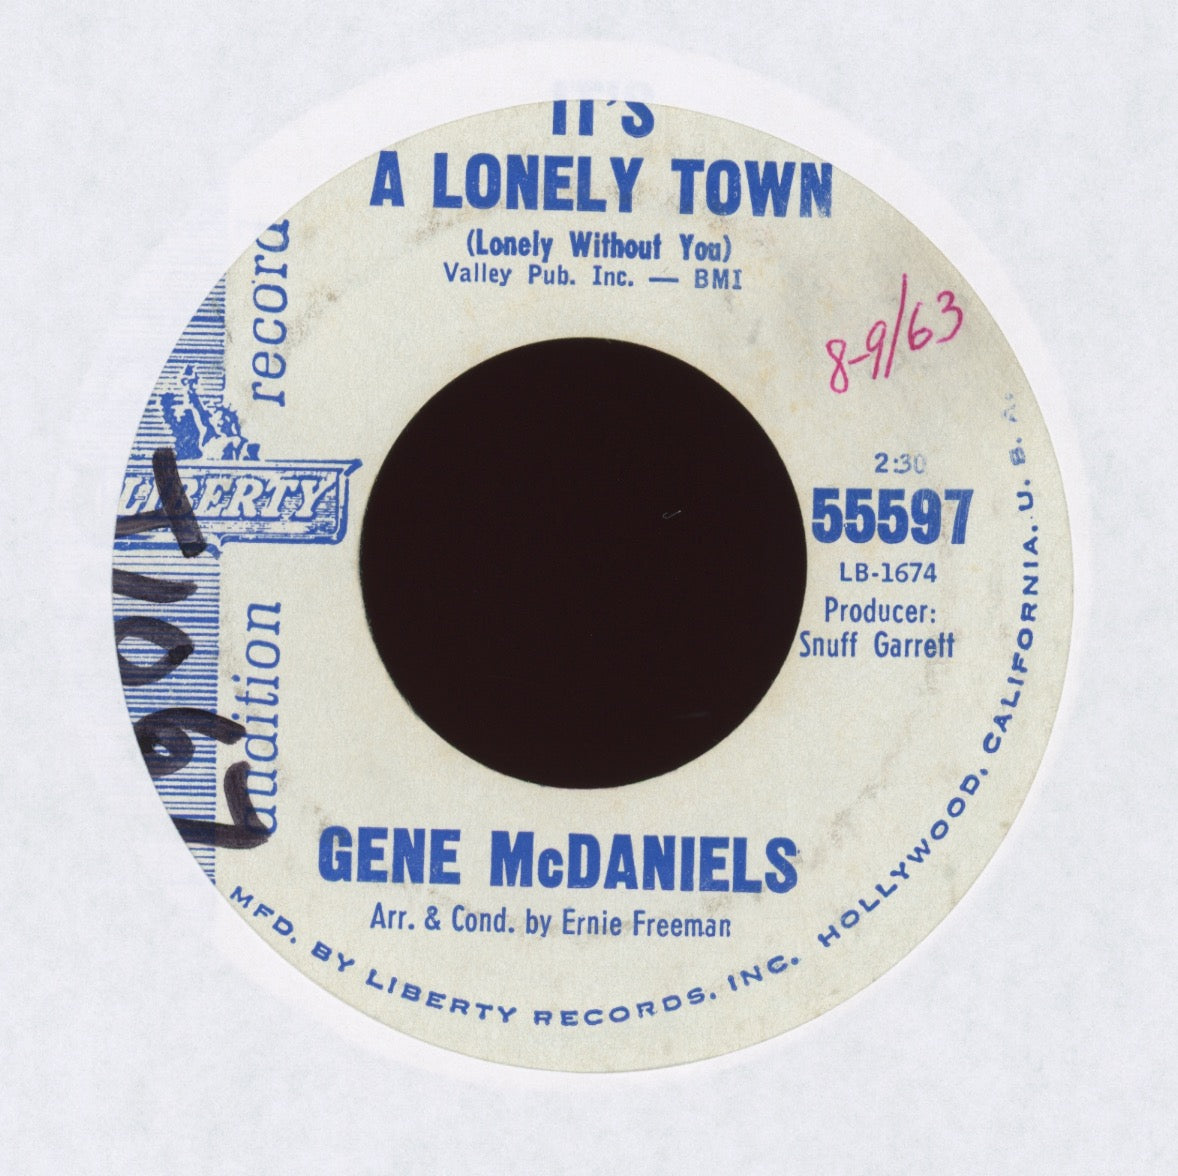 Eugene McDaniels - It's A Lonely Town (Lonely Without You) on Liberty Promo